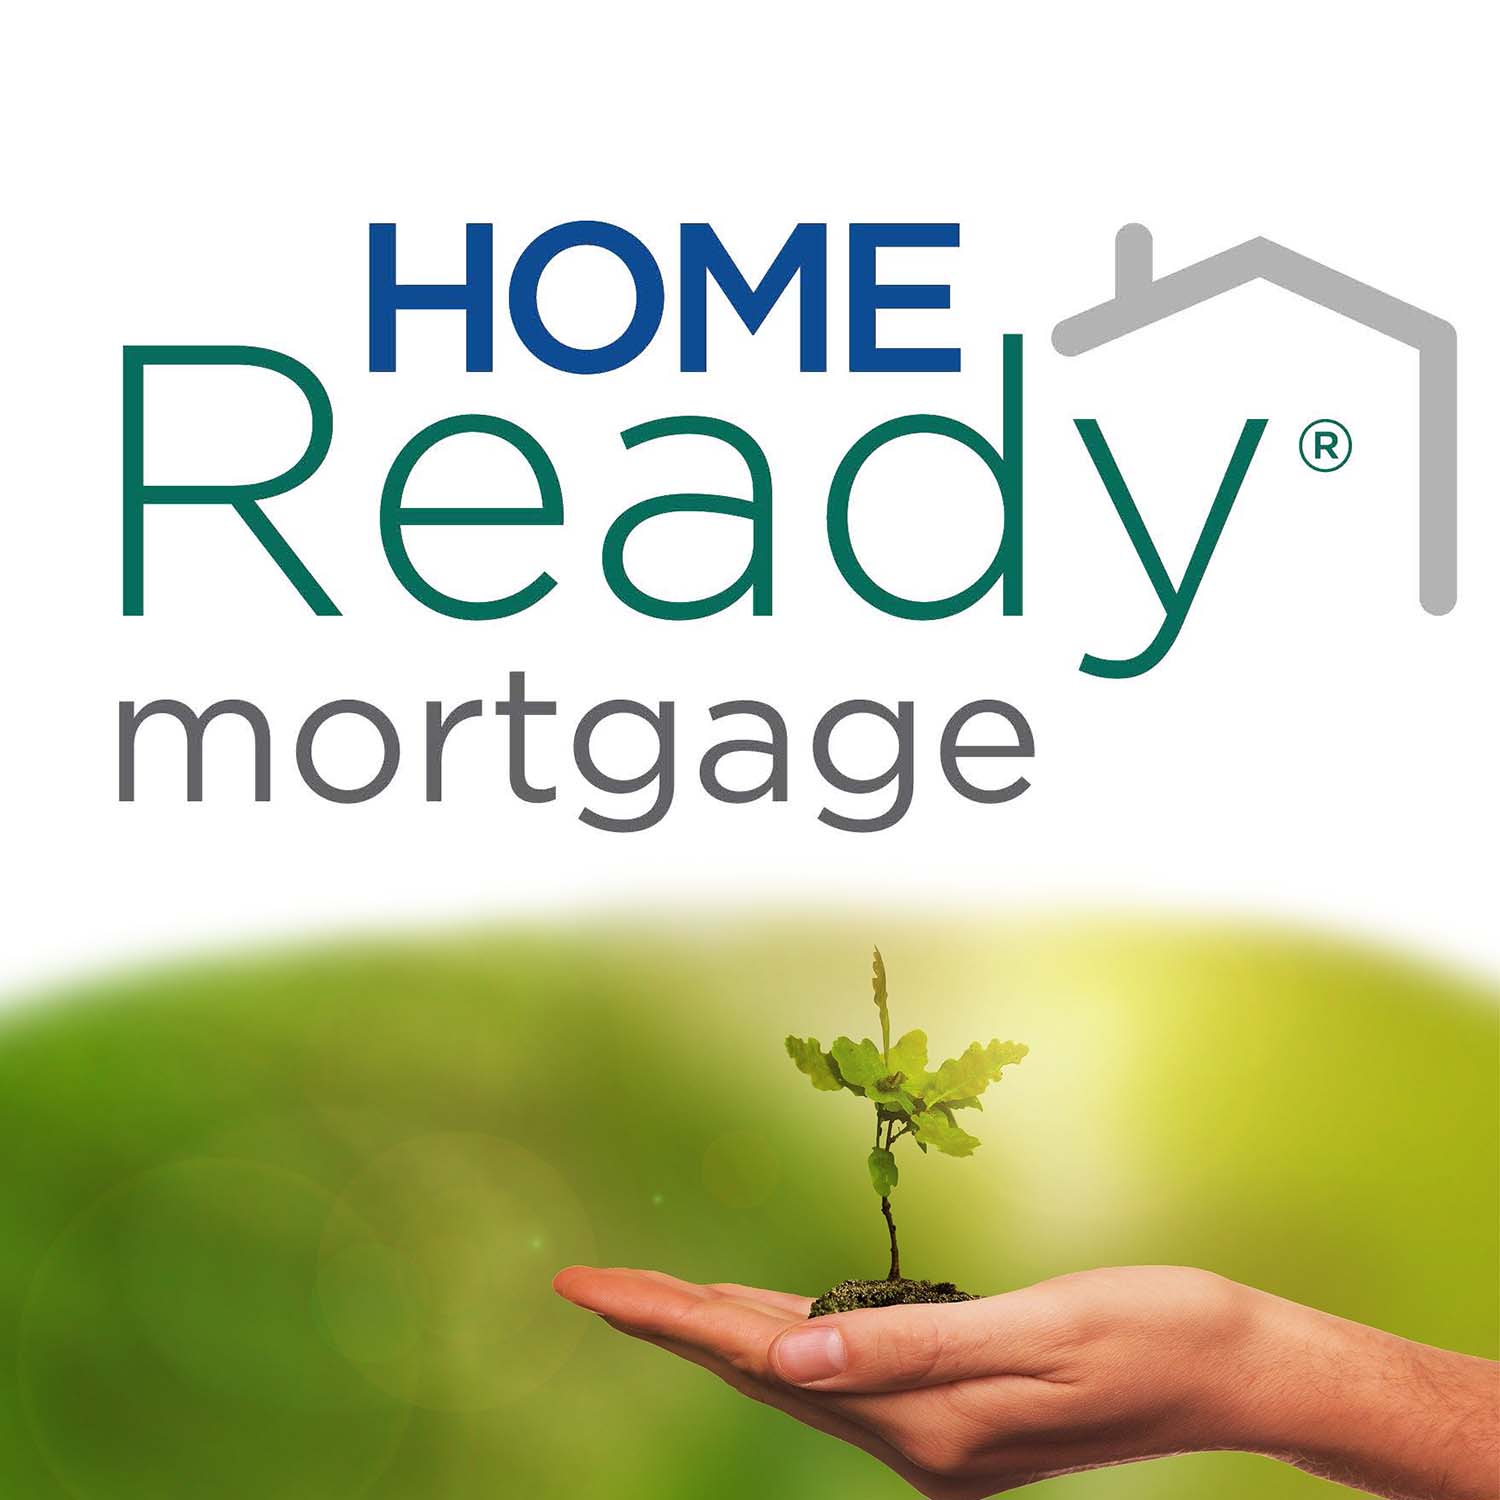 Image of a hand holding a tree seedling in its palm with the Home Ready mortgage logo. 